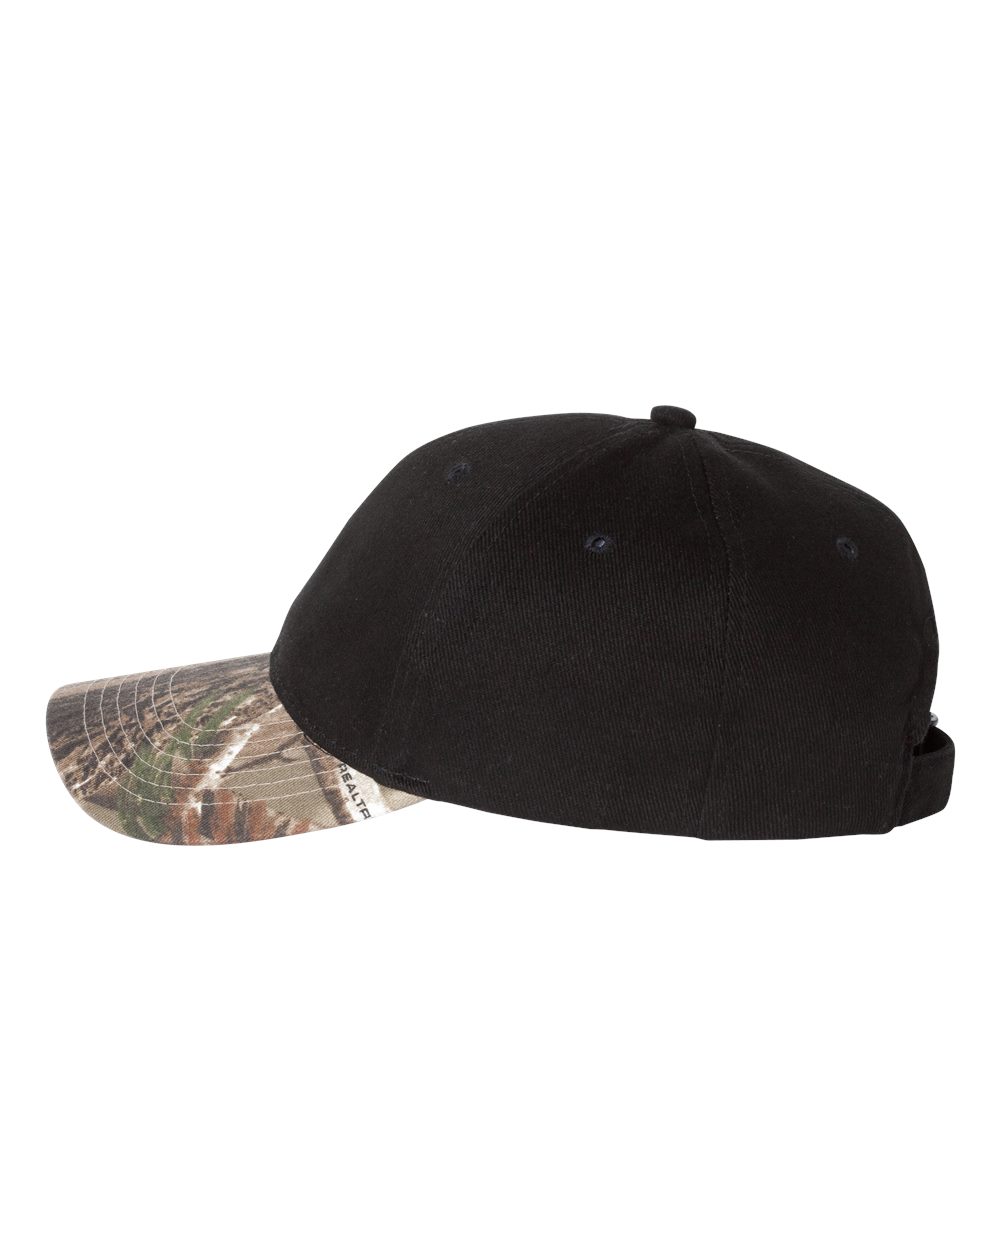 'Kati LC25 Solid Crown Camouflage Cap'